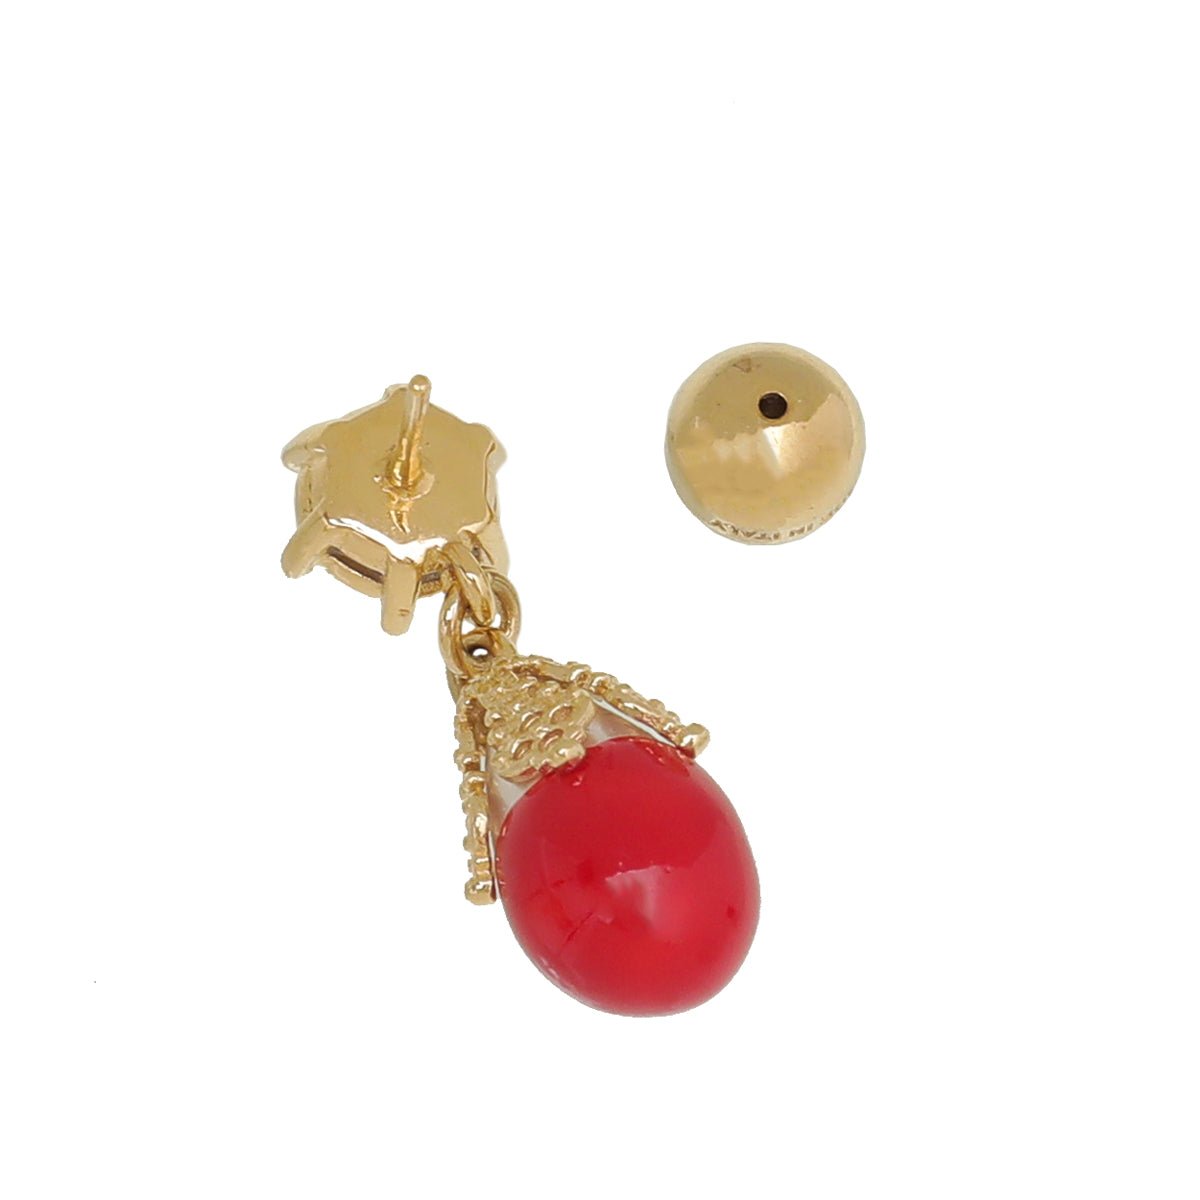 thecloset.uae - Burberry Bright Red Crown Crystal Pearl Drop Earrings | The Closet